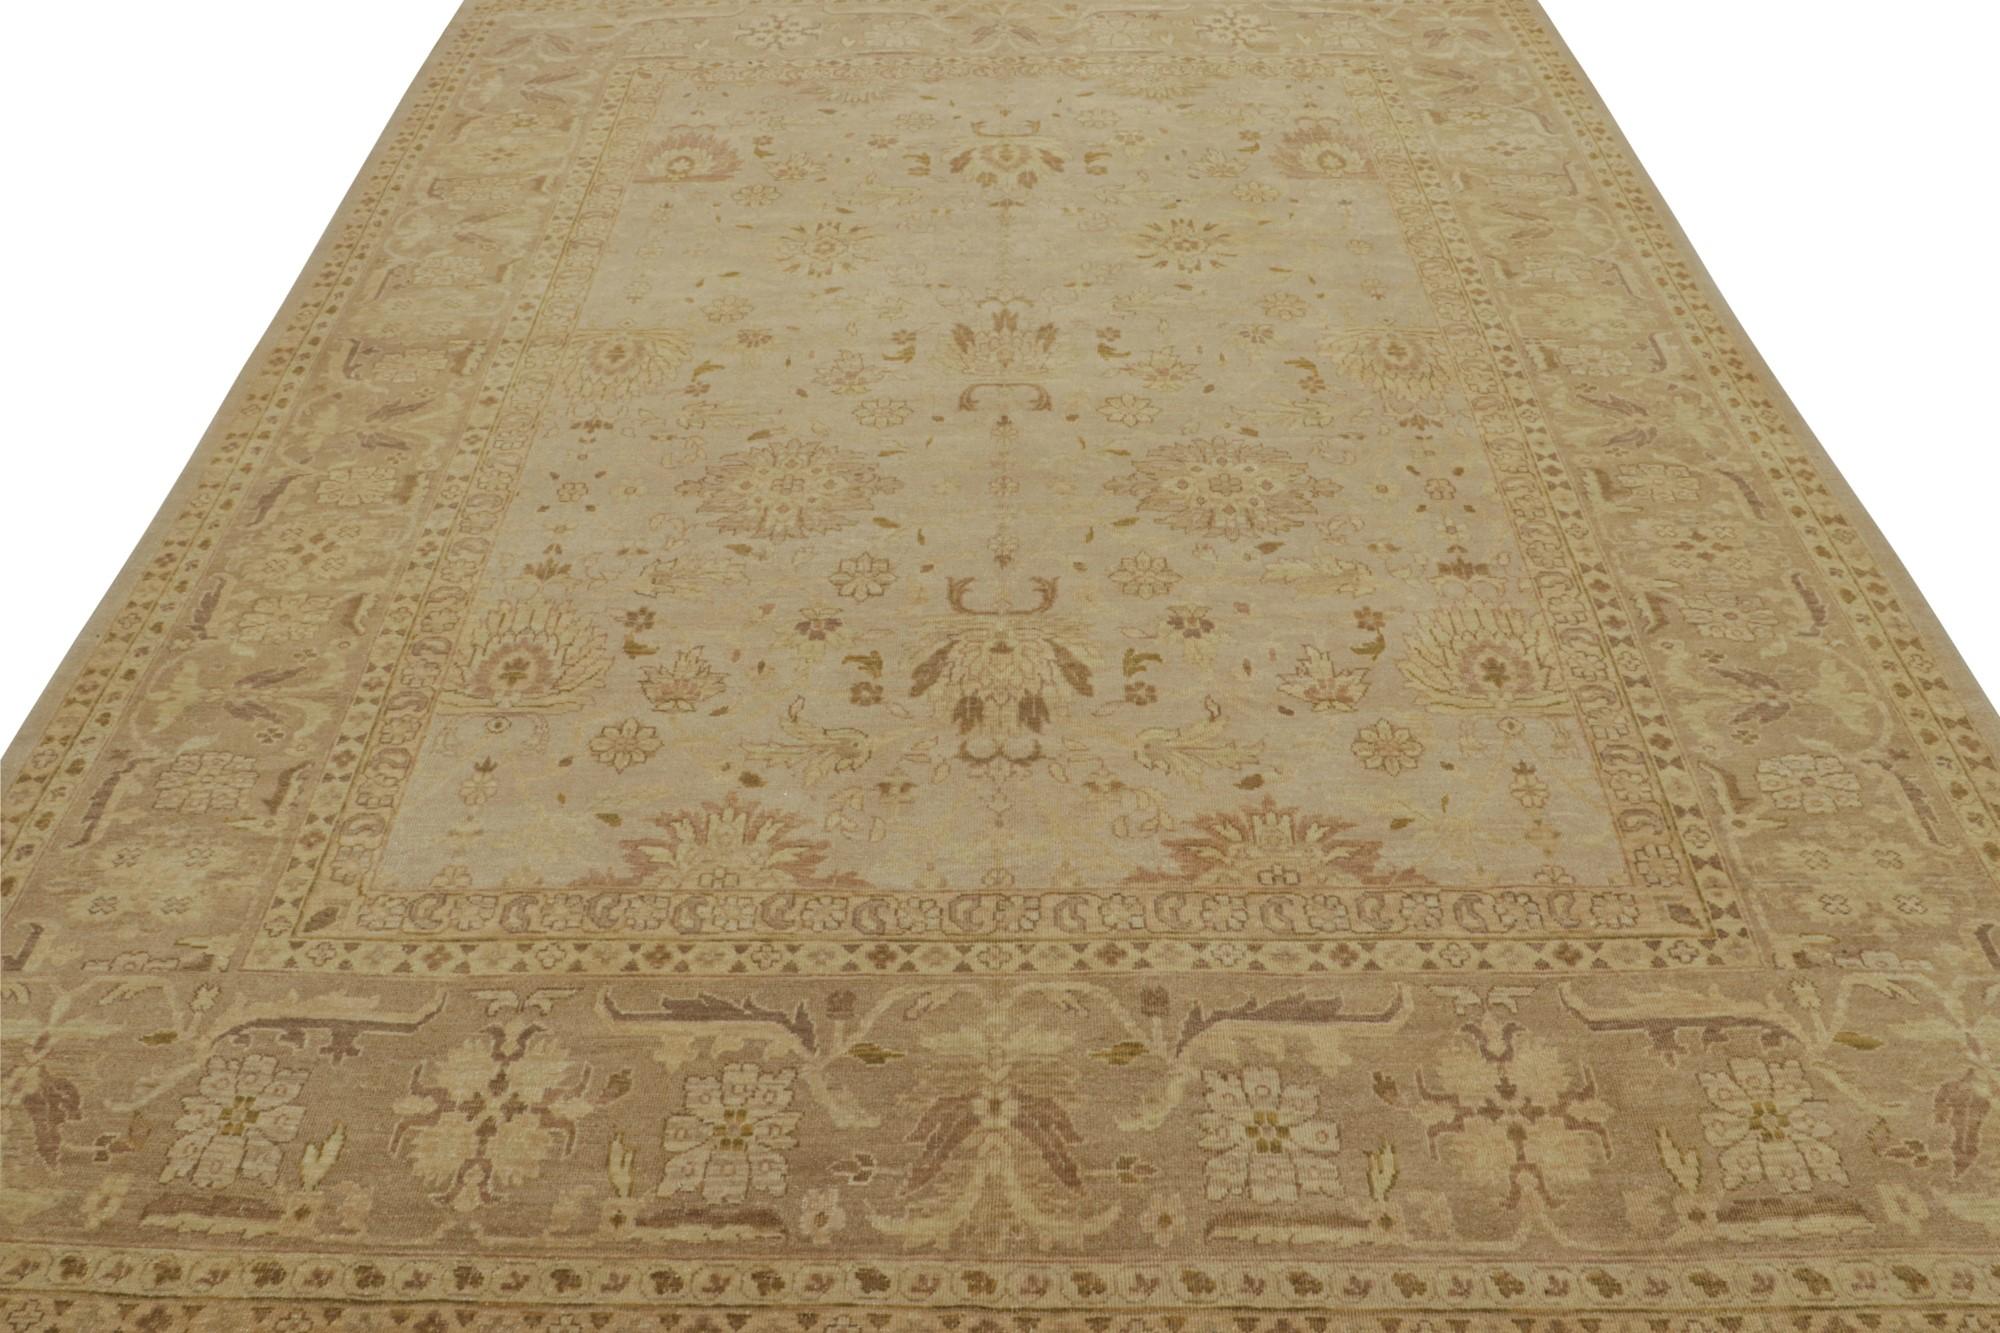 Modern Rug & Kilim’s Persian Mahal Style Rug in Beige-Brown with Floral Patterns